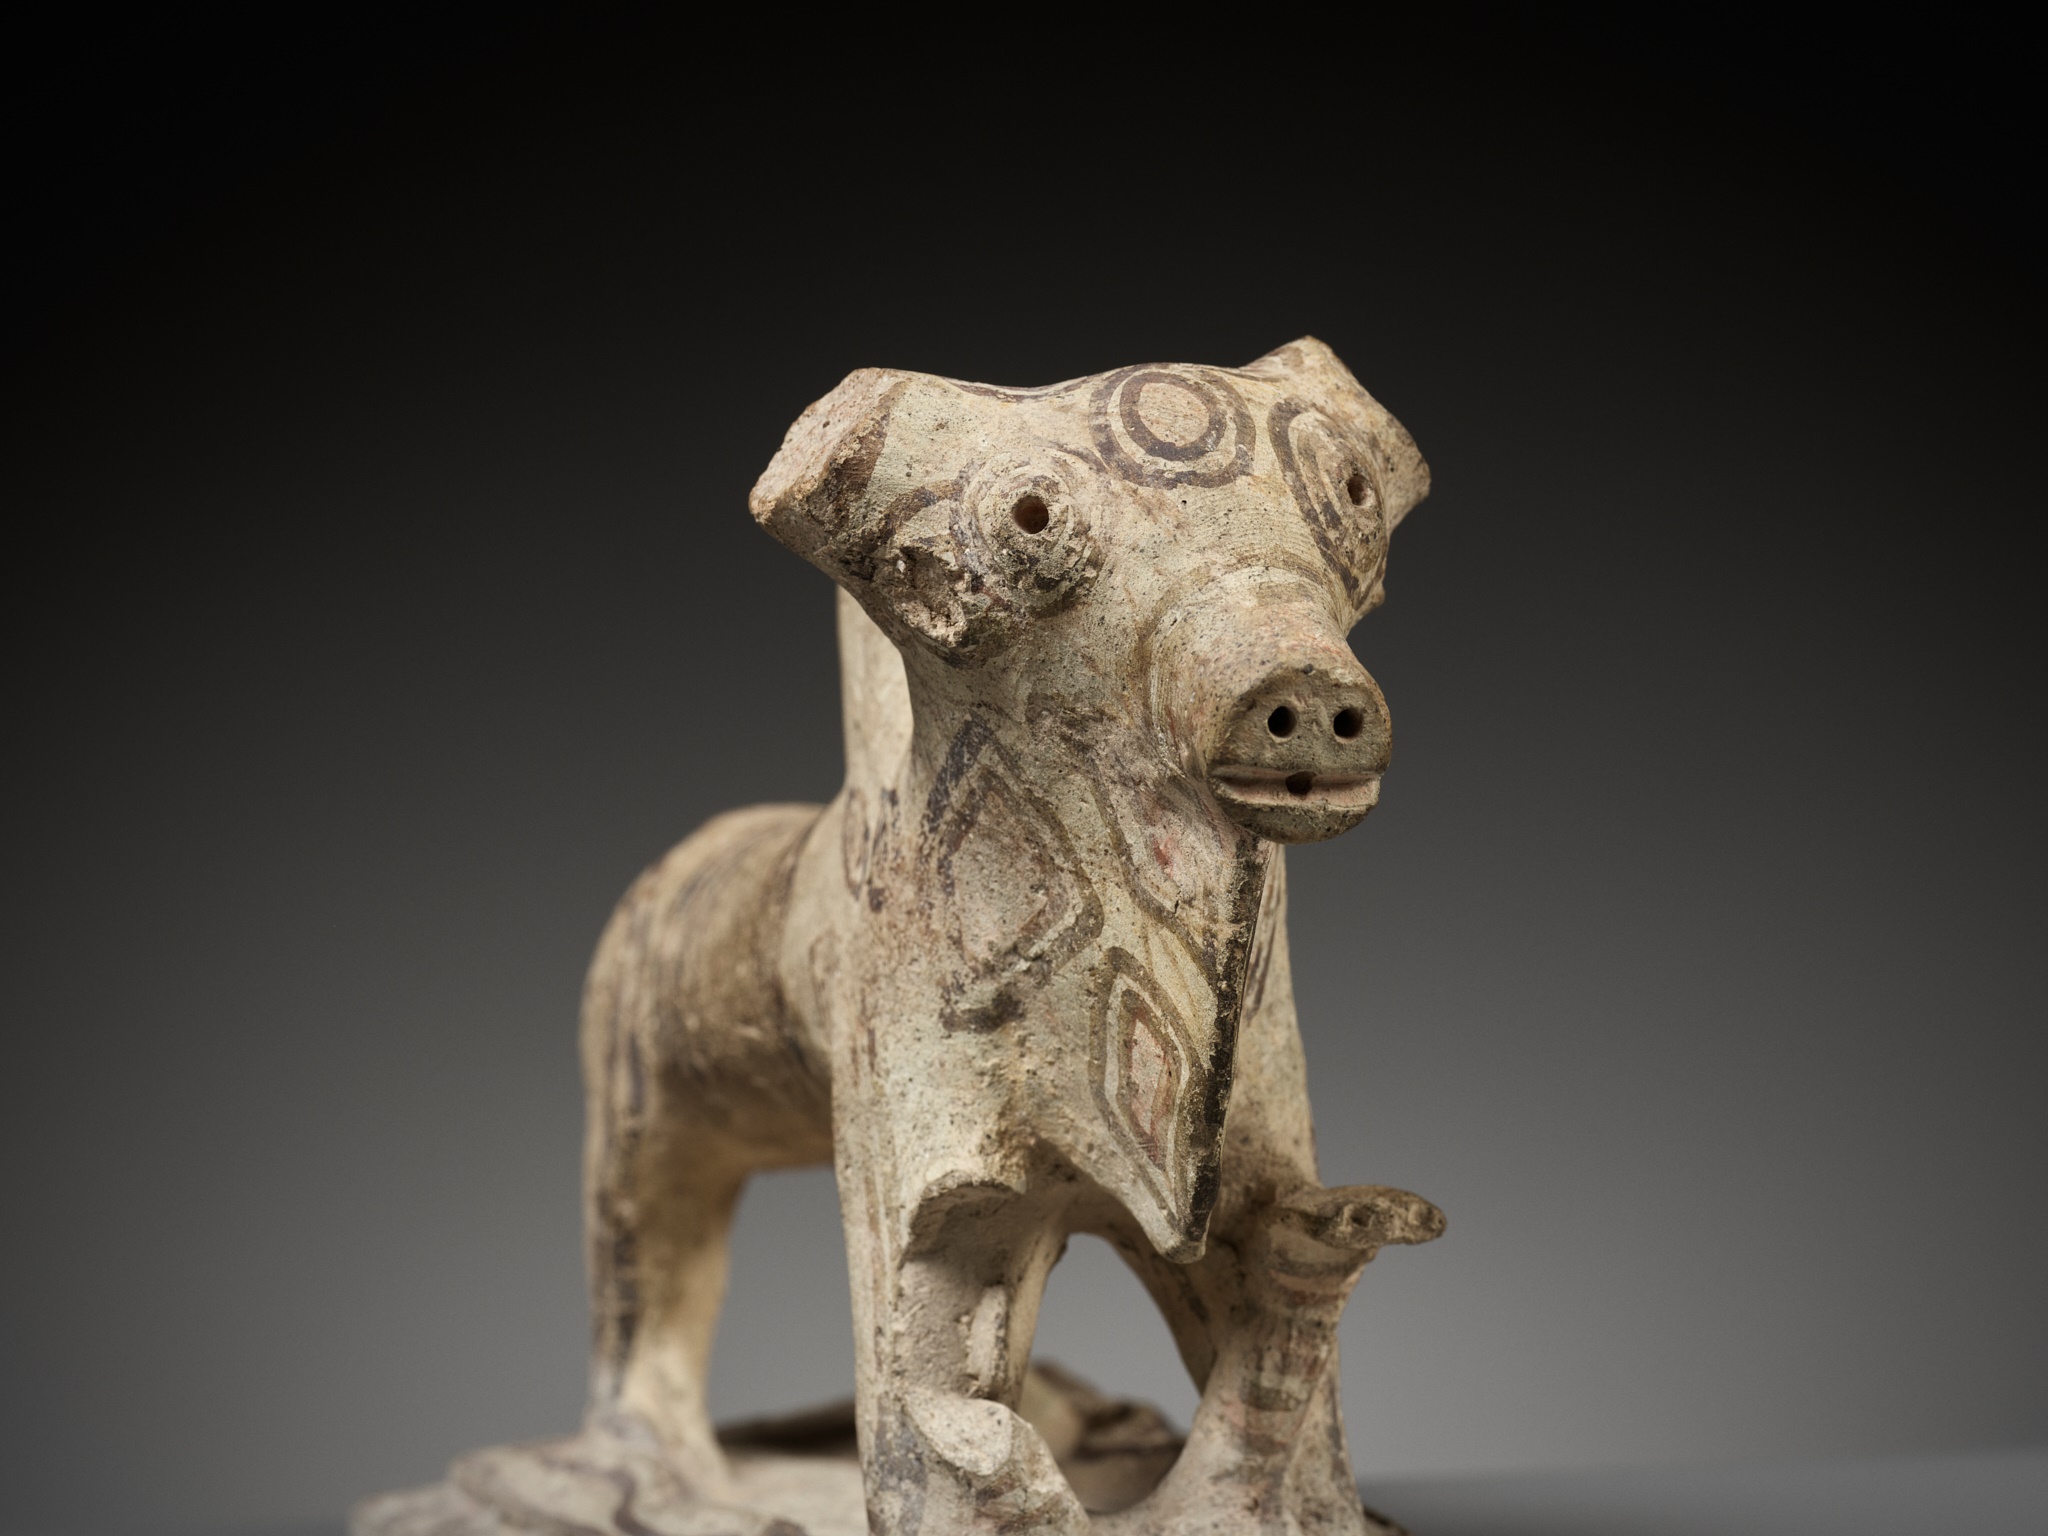 A PAINTED TERRACOTTA FIGURE OF A HUMPED OX, MOHENJO-DARO - Image 2 of 12